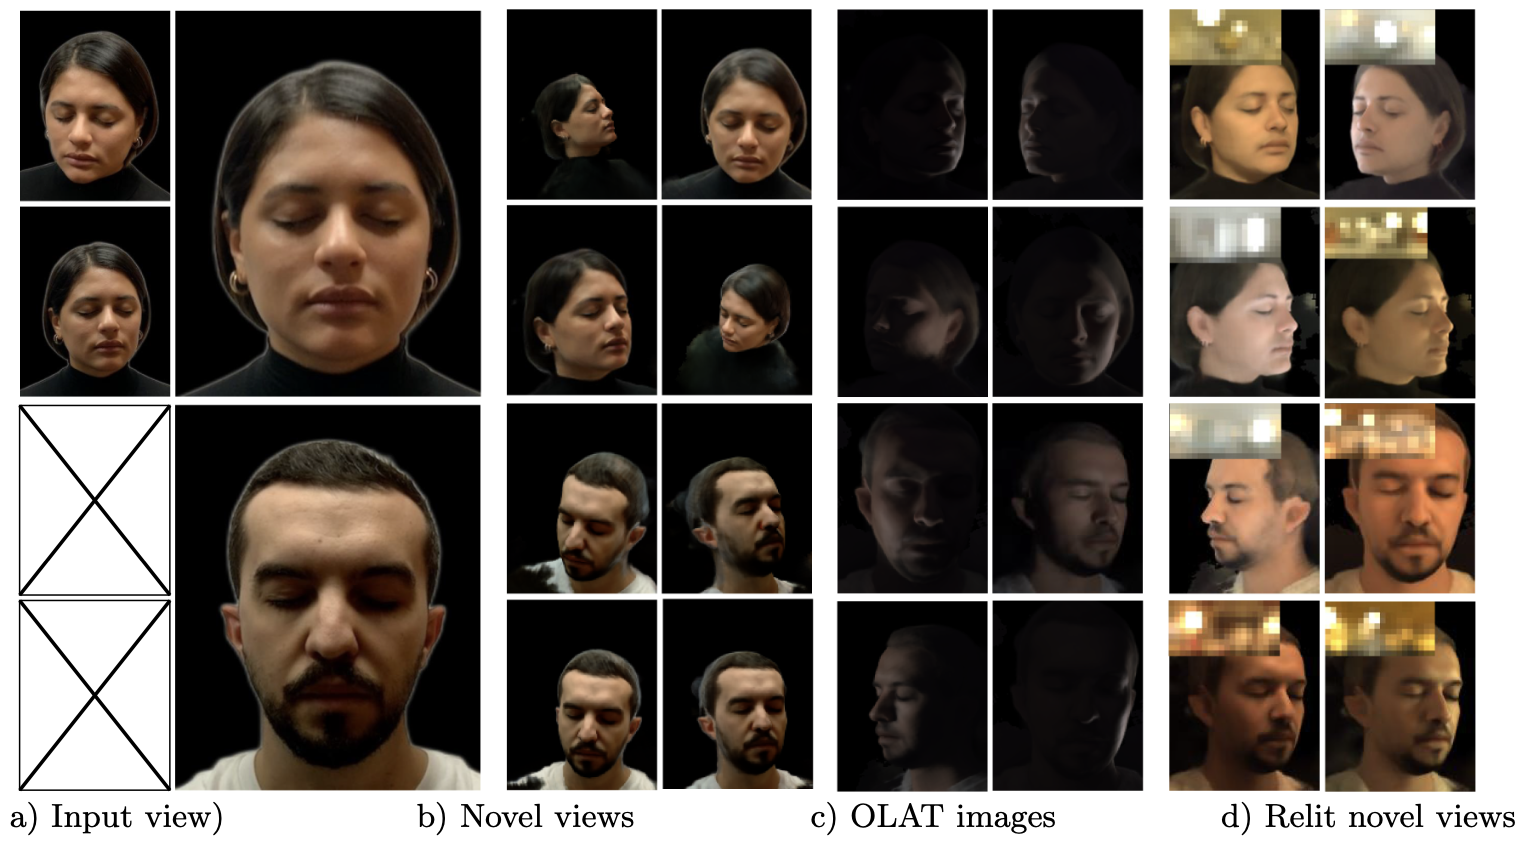 A Deeper Analysis of Volumetric Relightiable Faces